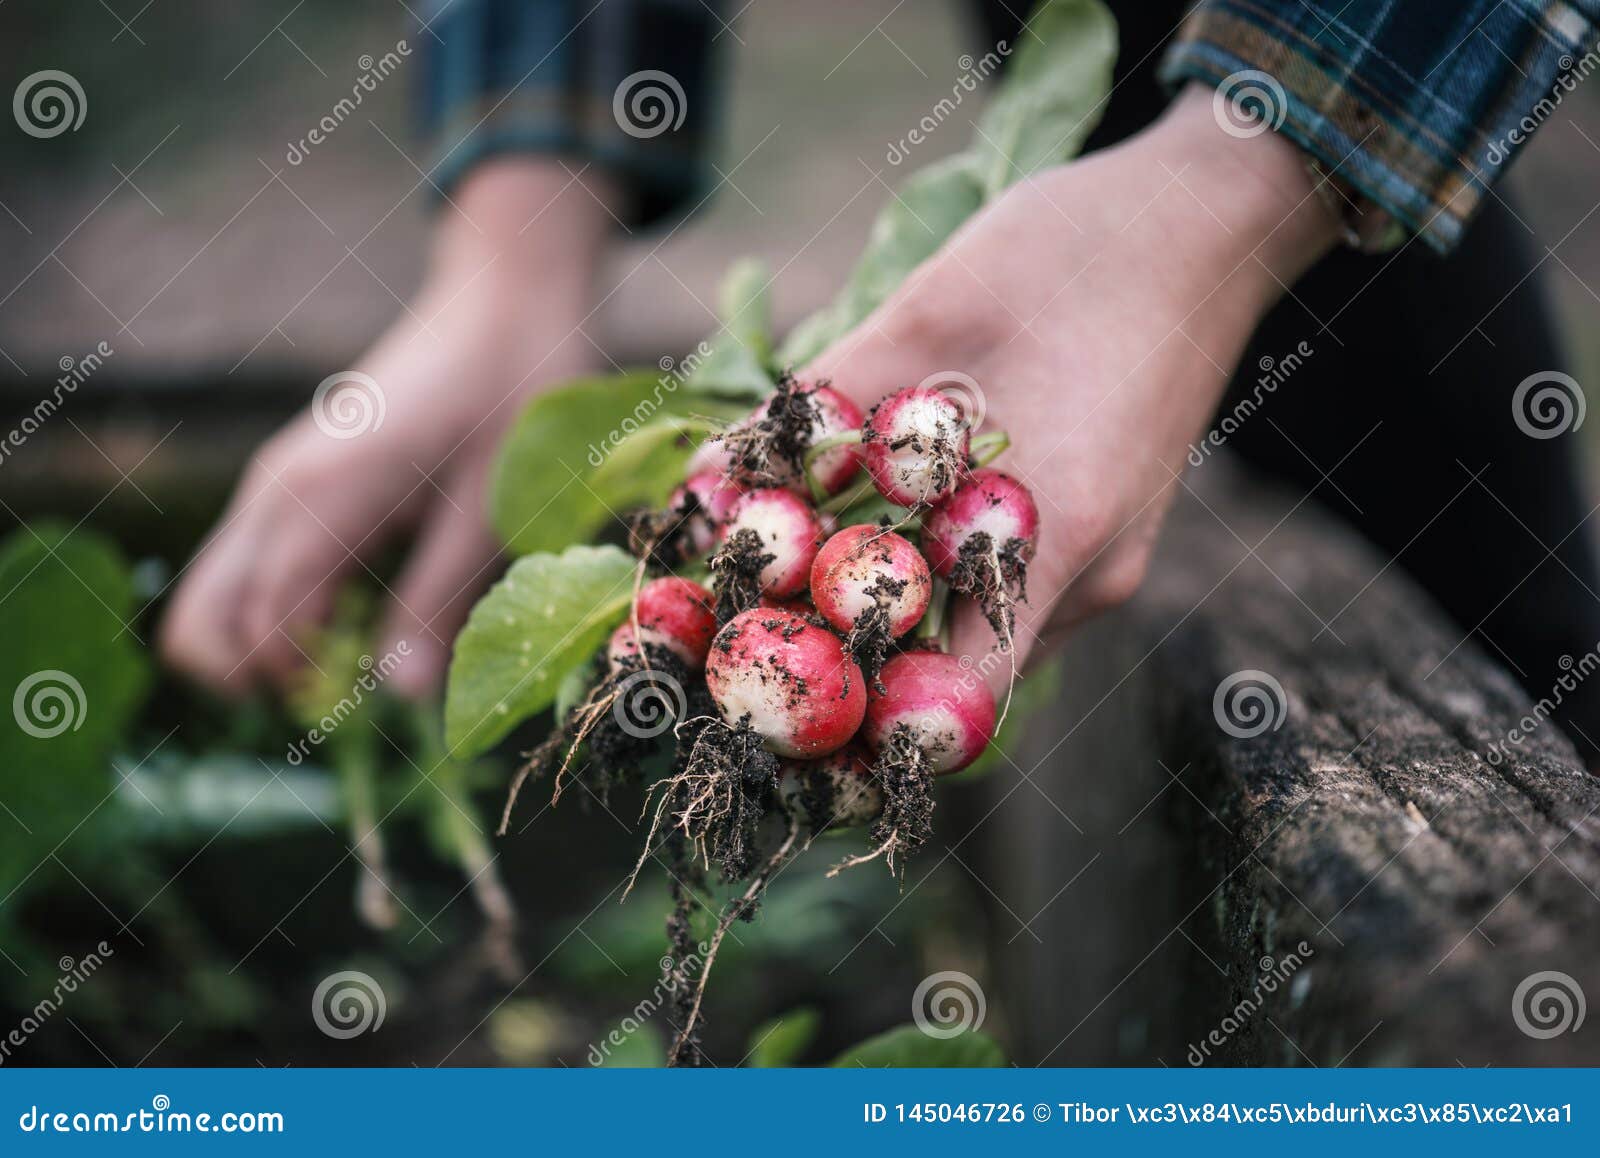 vegetable harvest. hands holding a fresh radish from small farm. concept of agricultural. young woman picking root vegetables.